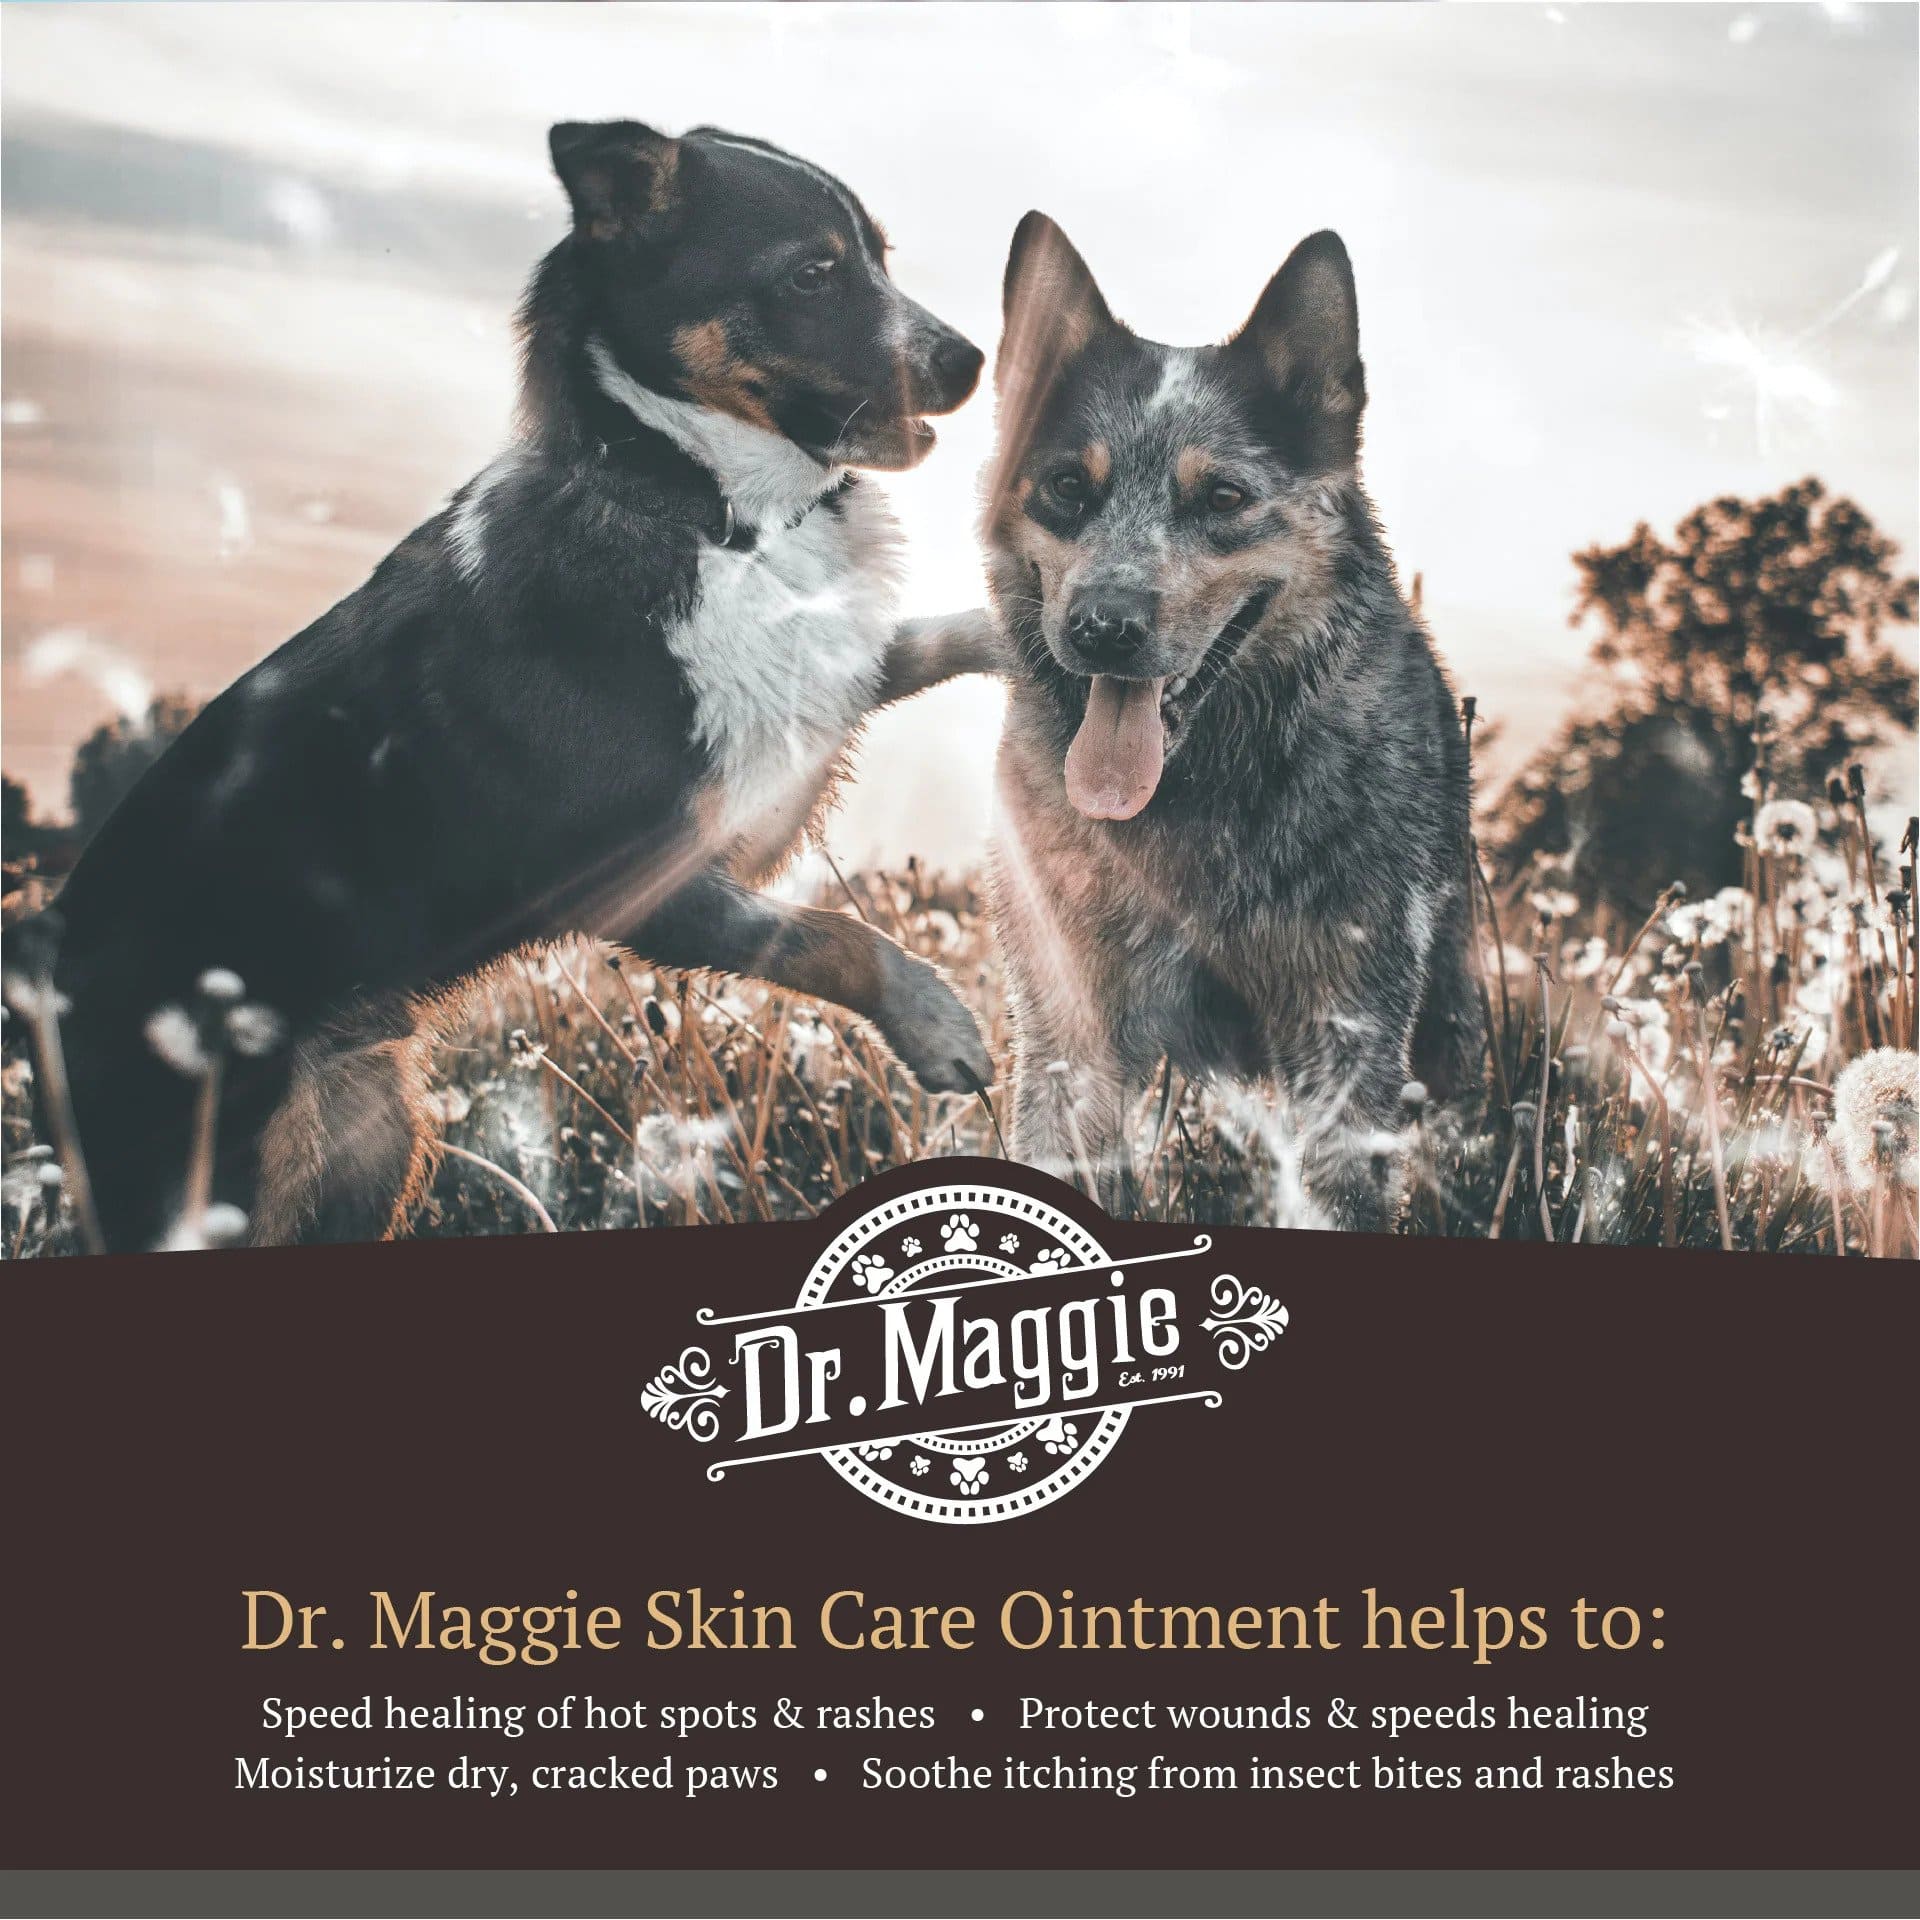 Dr. Maggie Skin Care Ointment Benefits